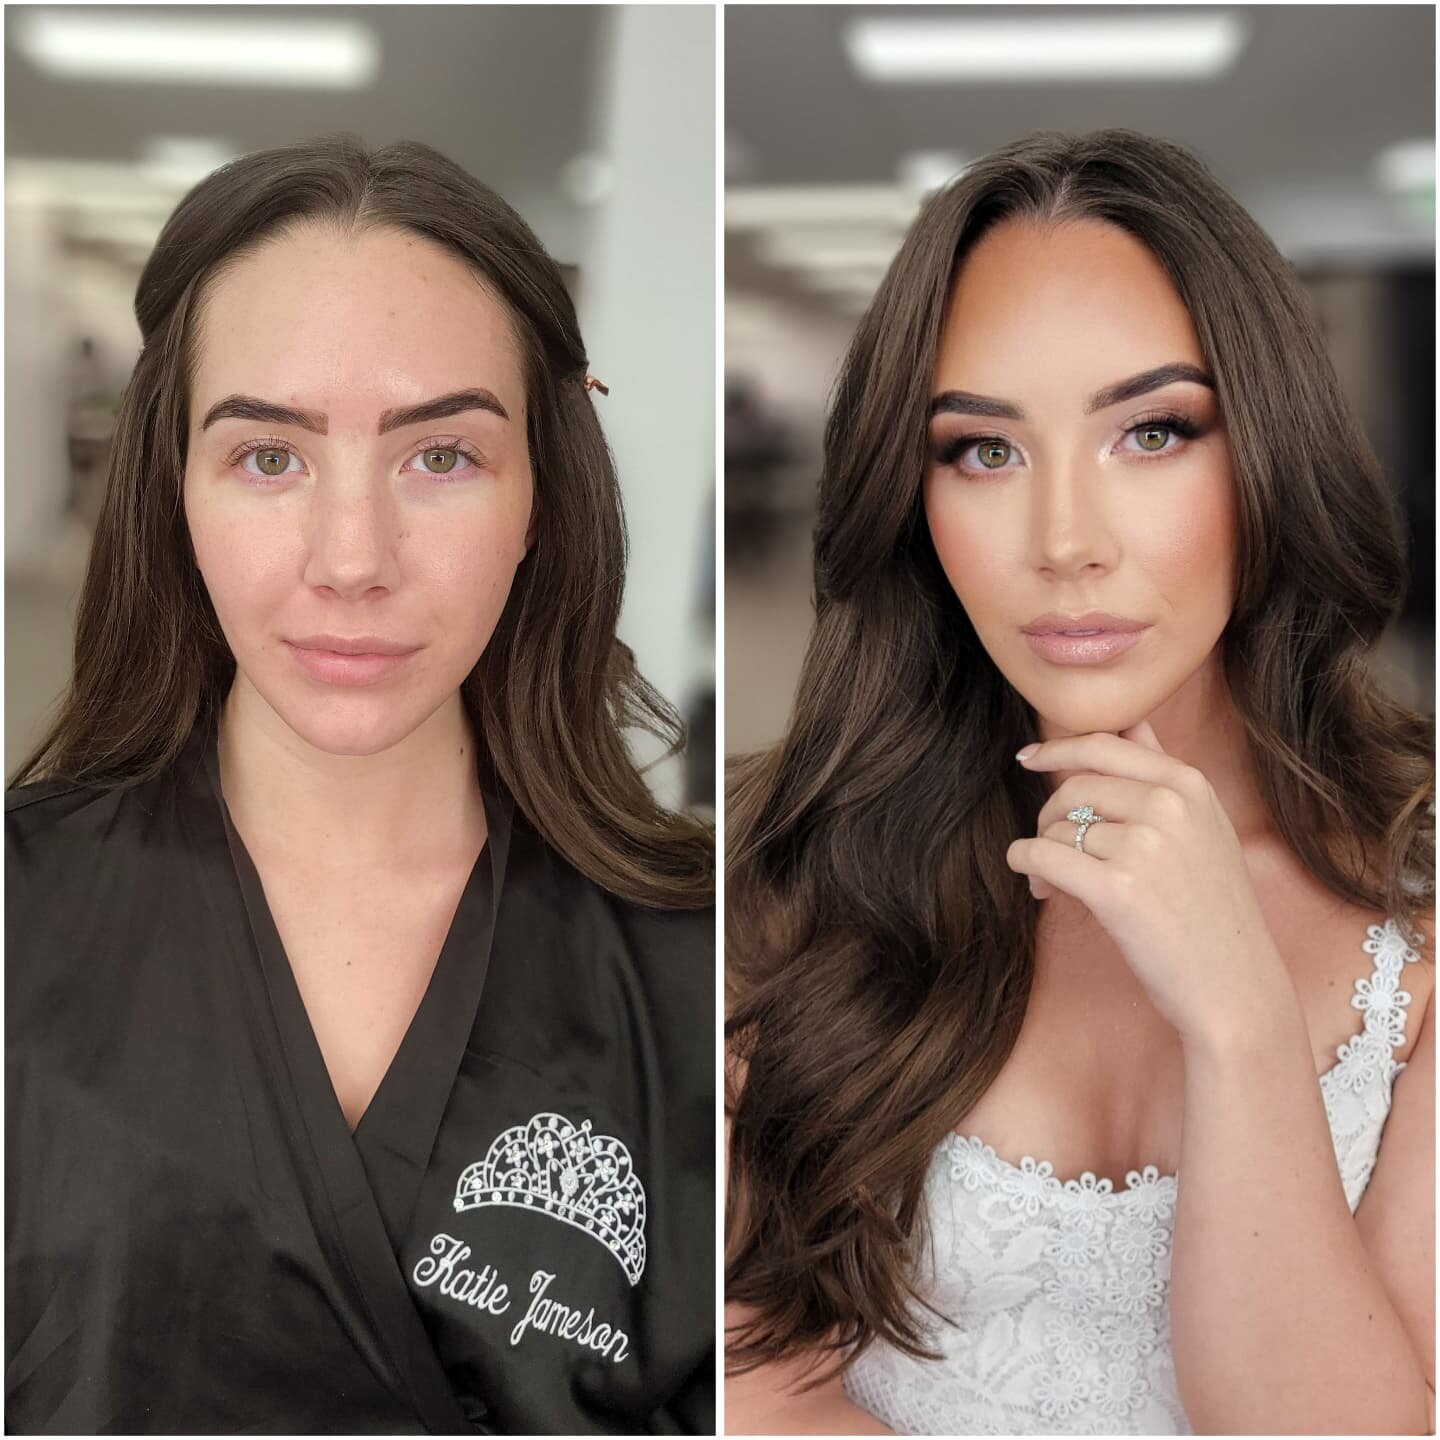 Beautiful before, beautiful after.
Full transparency, this look took me an hour and a half. Not because it was anything too complicated or challenging, but I just needed to let myself create, without time in mind.

Lash is Eva from @livlashes.co. Lau